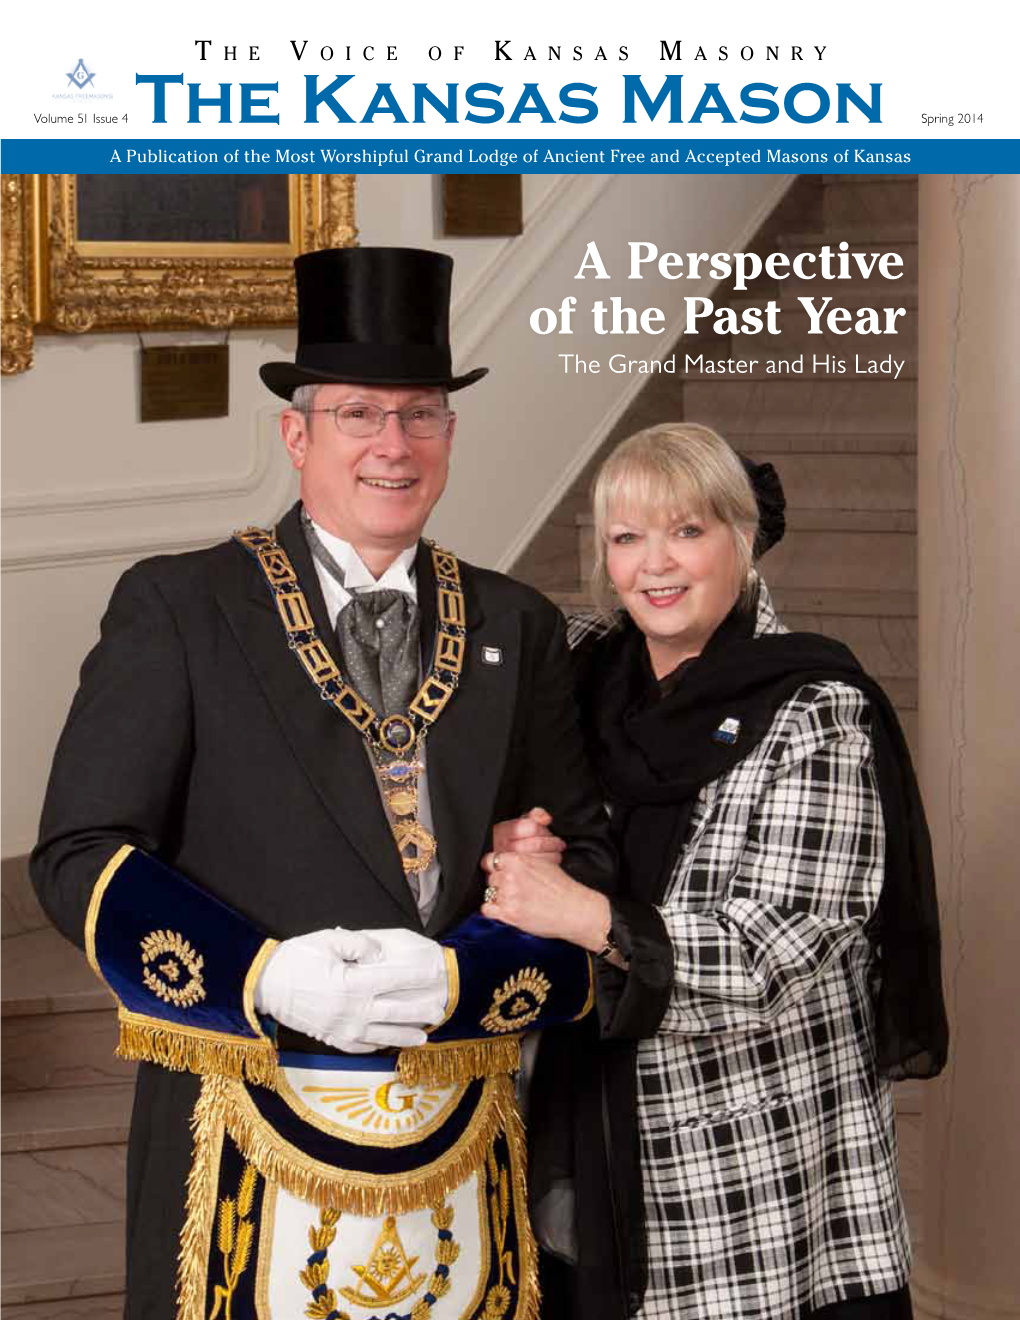 The Kansas Mason Spring 2014 a Publication of the Most Worshipful Grand Lodge of Ancient Free and Accepted Masons of Kansas